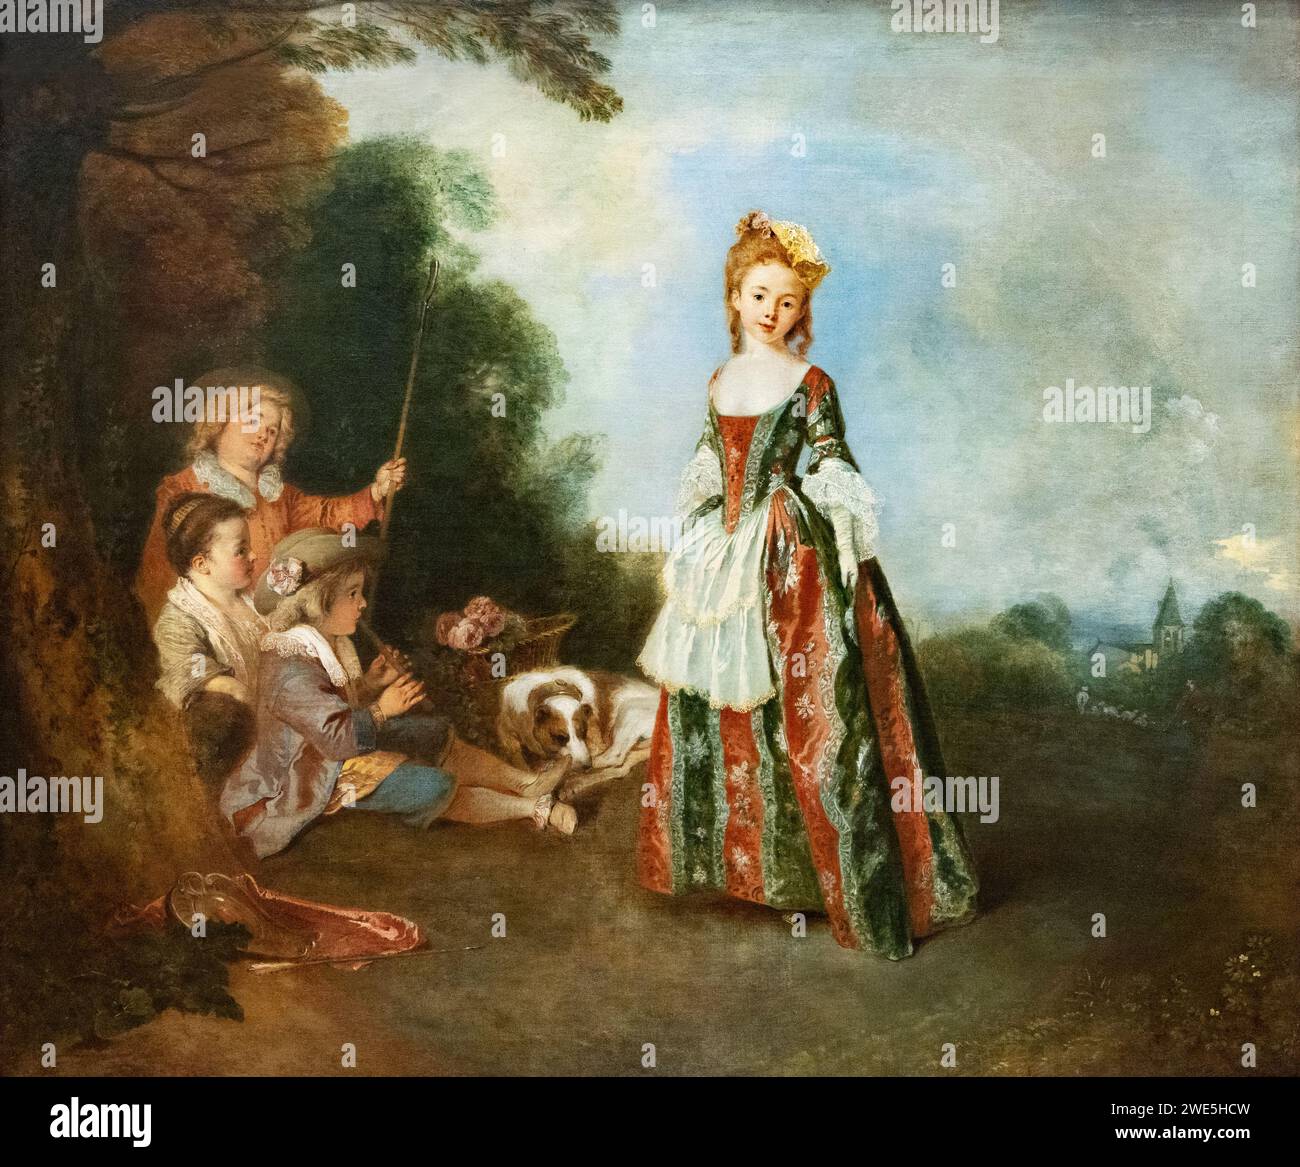 Jean-Antoine Watteau painting, 'The Dance' or 'Iris', c. 1718-21, French painter in the Baroque and Rococo style. Stock Photo